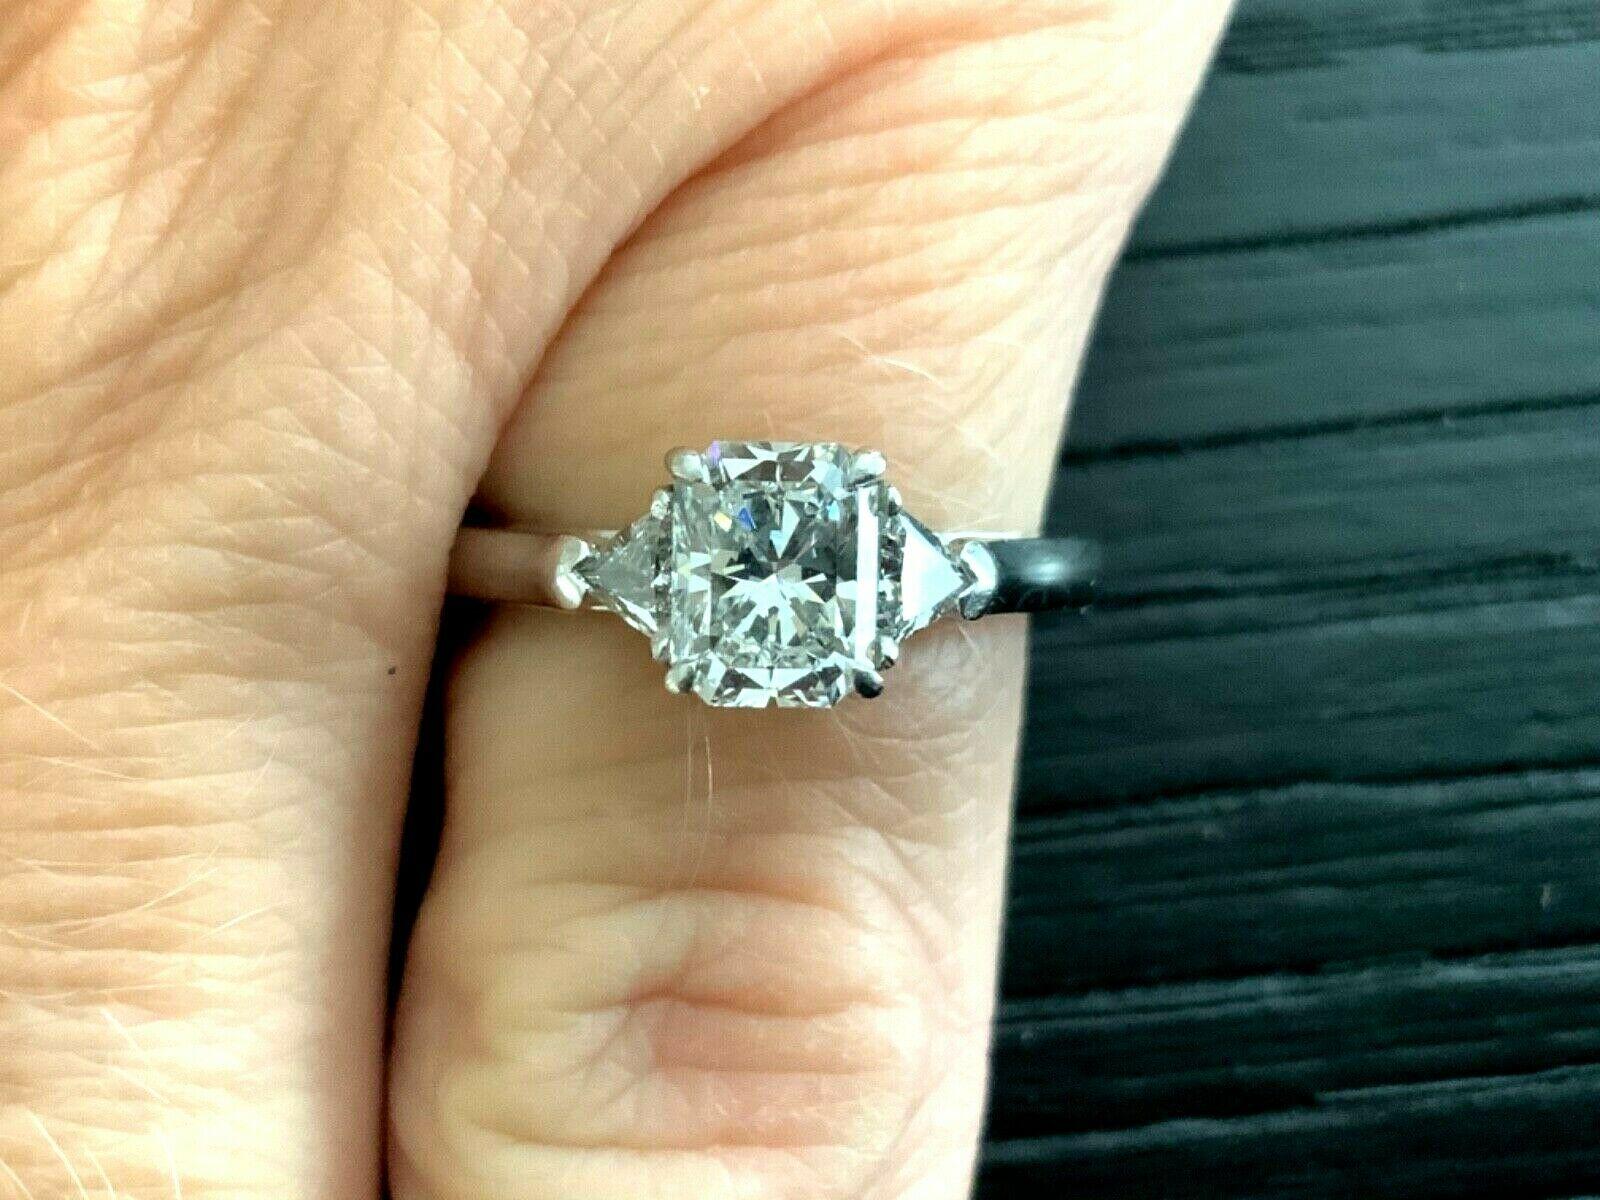 Being offered for your consideration is a stunning 3 stone Modified Rectangular Cushion Cut (Lucida) Diamond engagement ring or anniversary ring.  This ring can be paired with another or worn as a cocktail ring or anniversary band - it is extremely